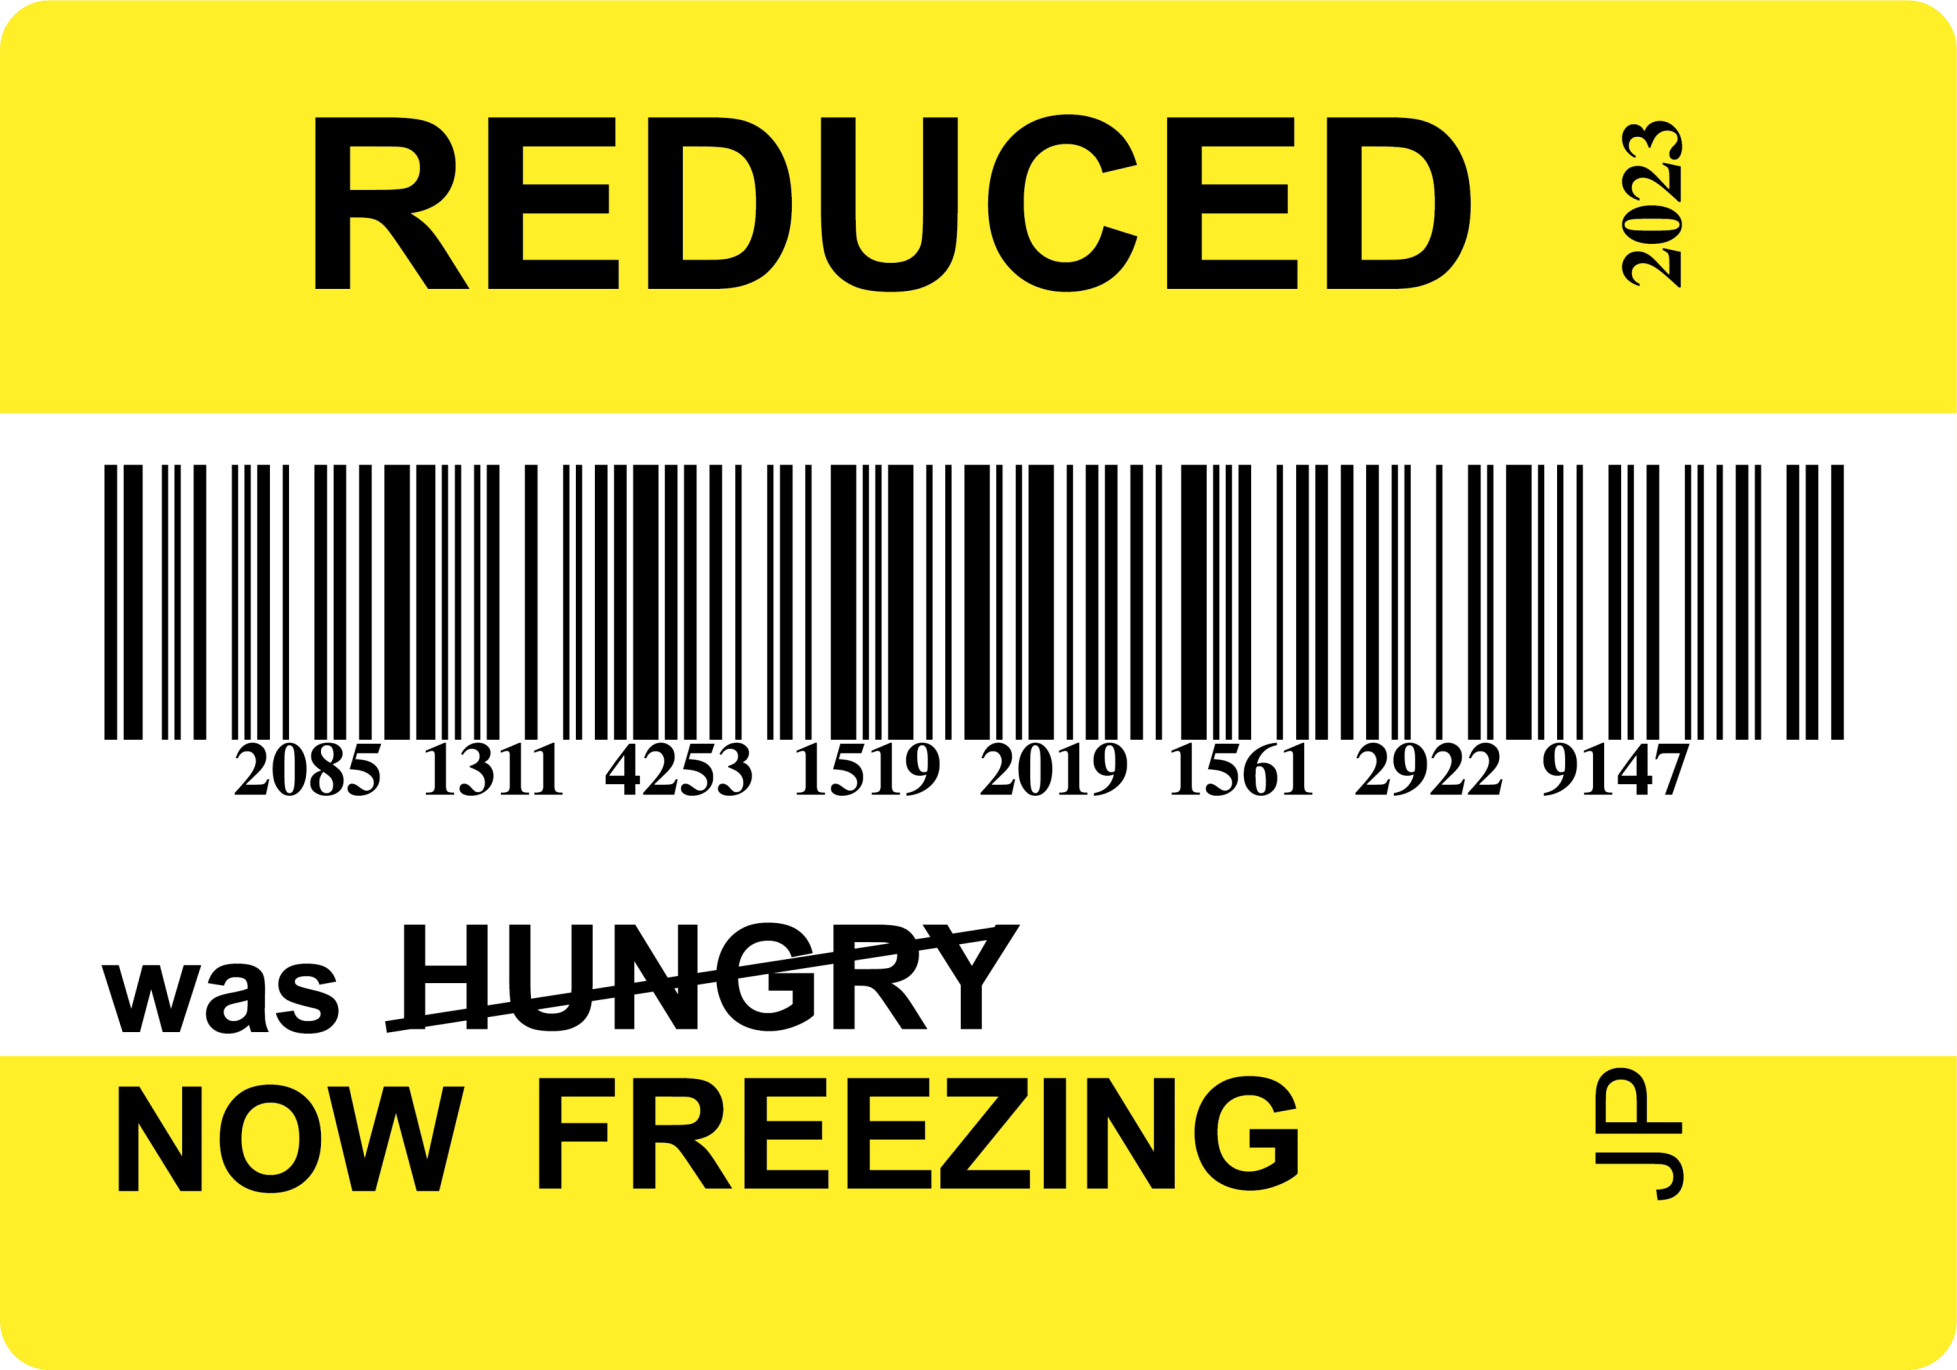 Landscape digital print of a reimagined supermarket reduced food label. The label is striped in thick yellow and white with a black barcode across the middle with text top and bottom that reads: REDUCED, was HUNGRY, NOW FREEZING. 